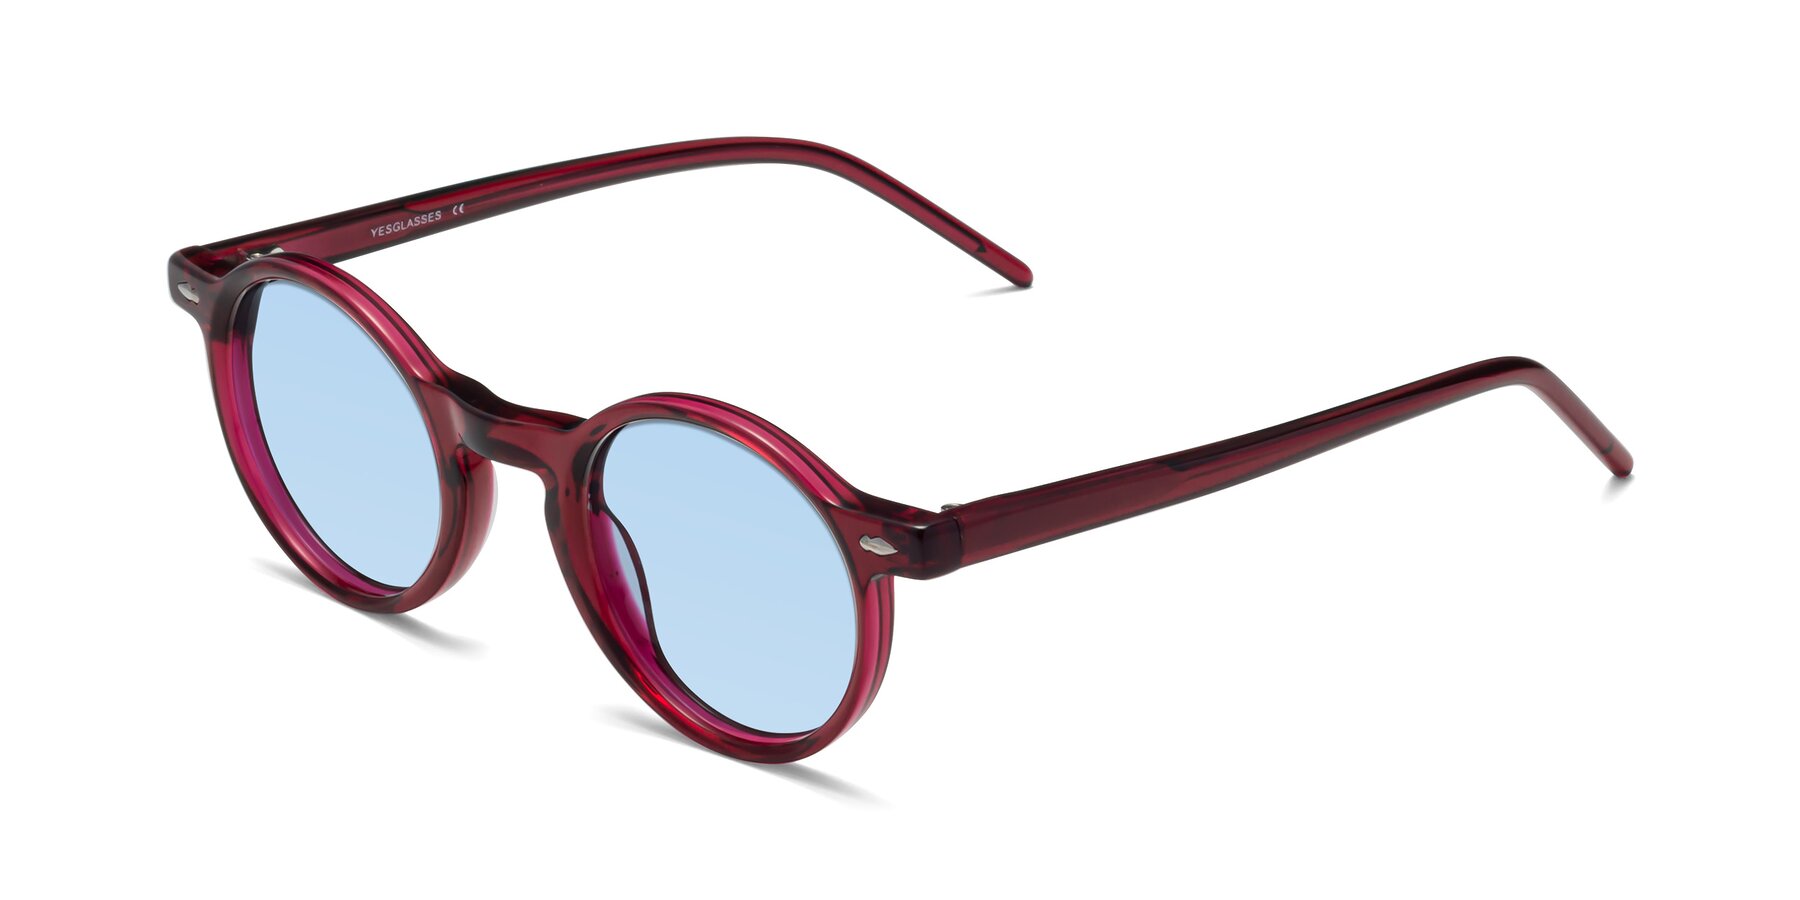 Angle of 1542 in Plum with Light Blue Tinted Lenses